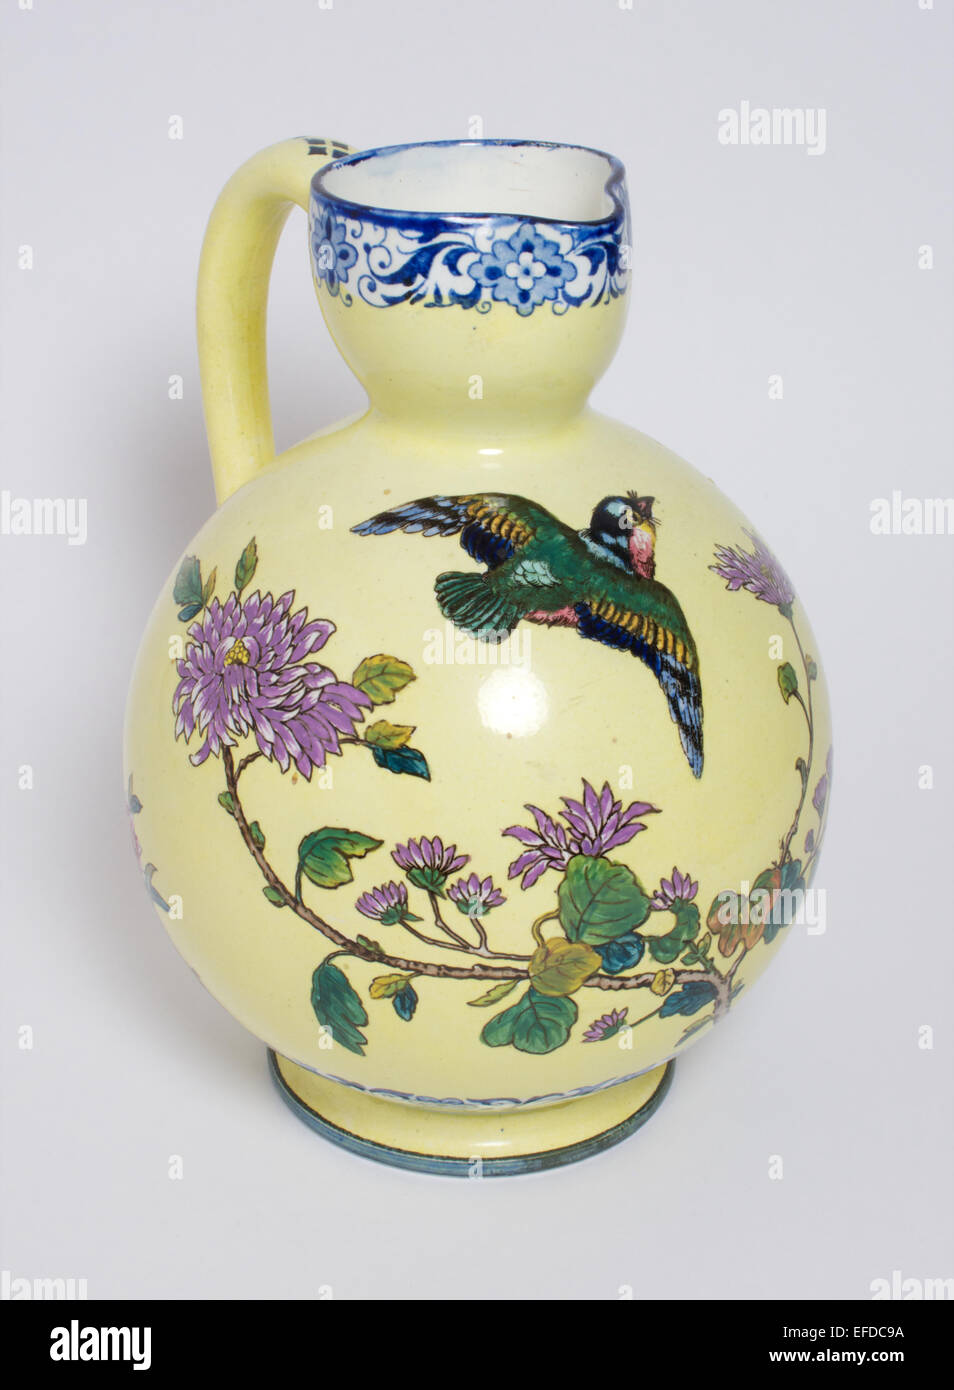 Antique Gien faience pottery bird & dragonfly jug Stock Photo